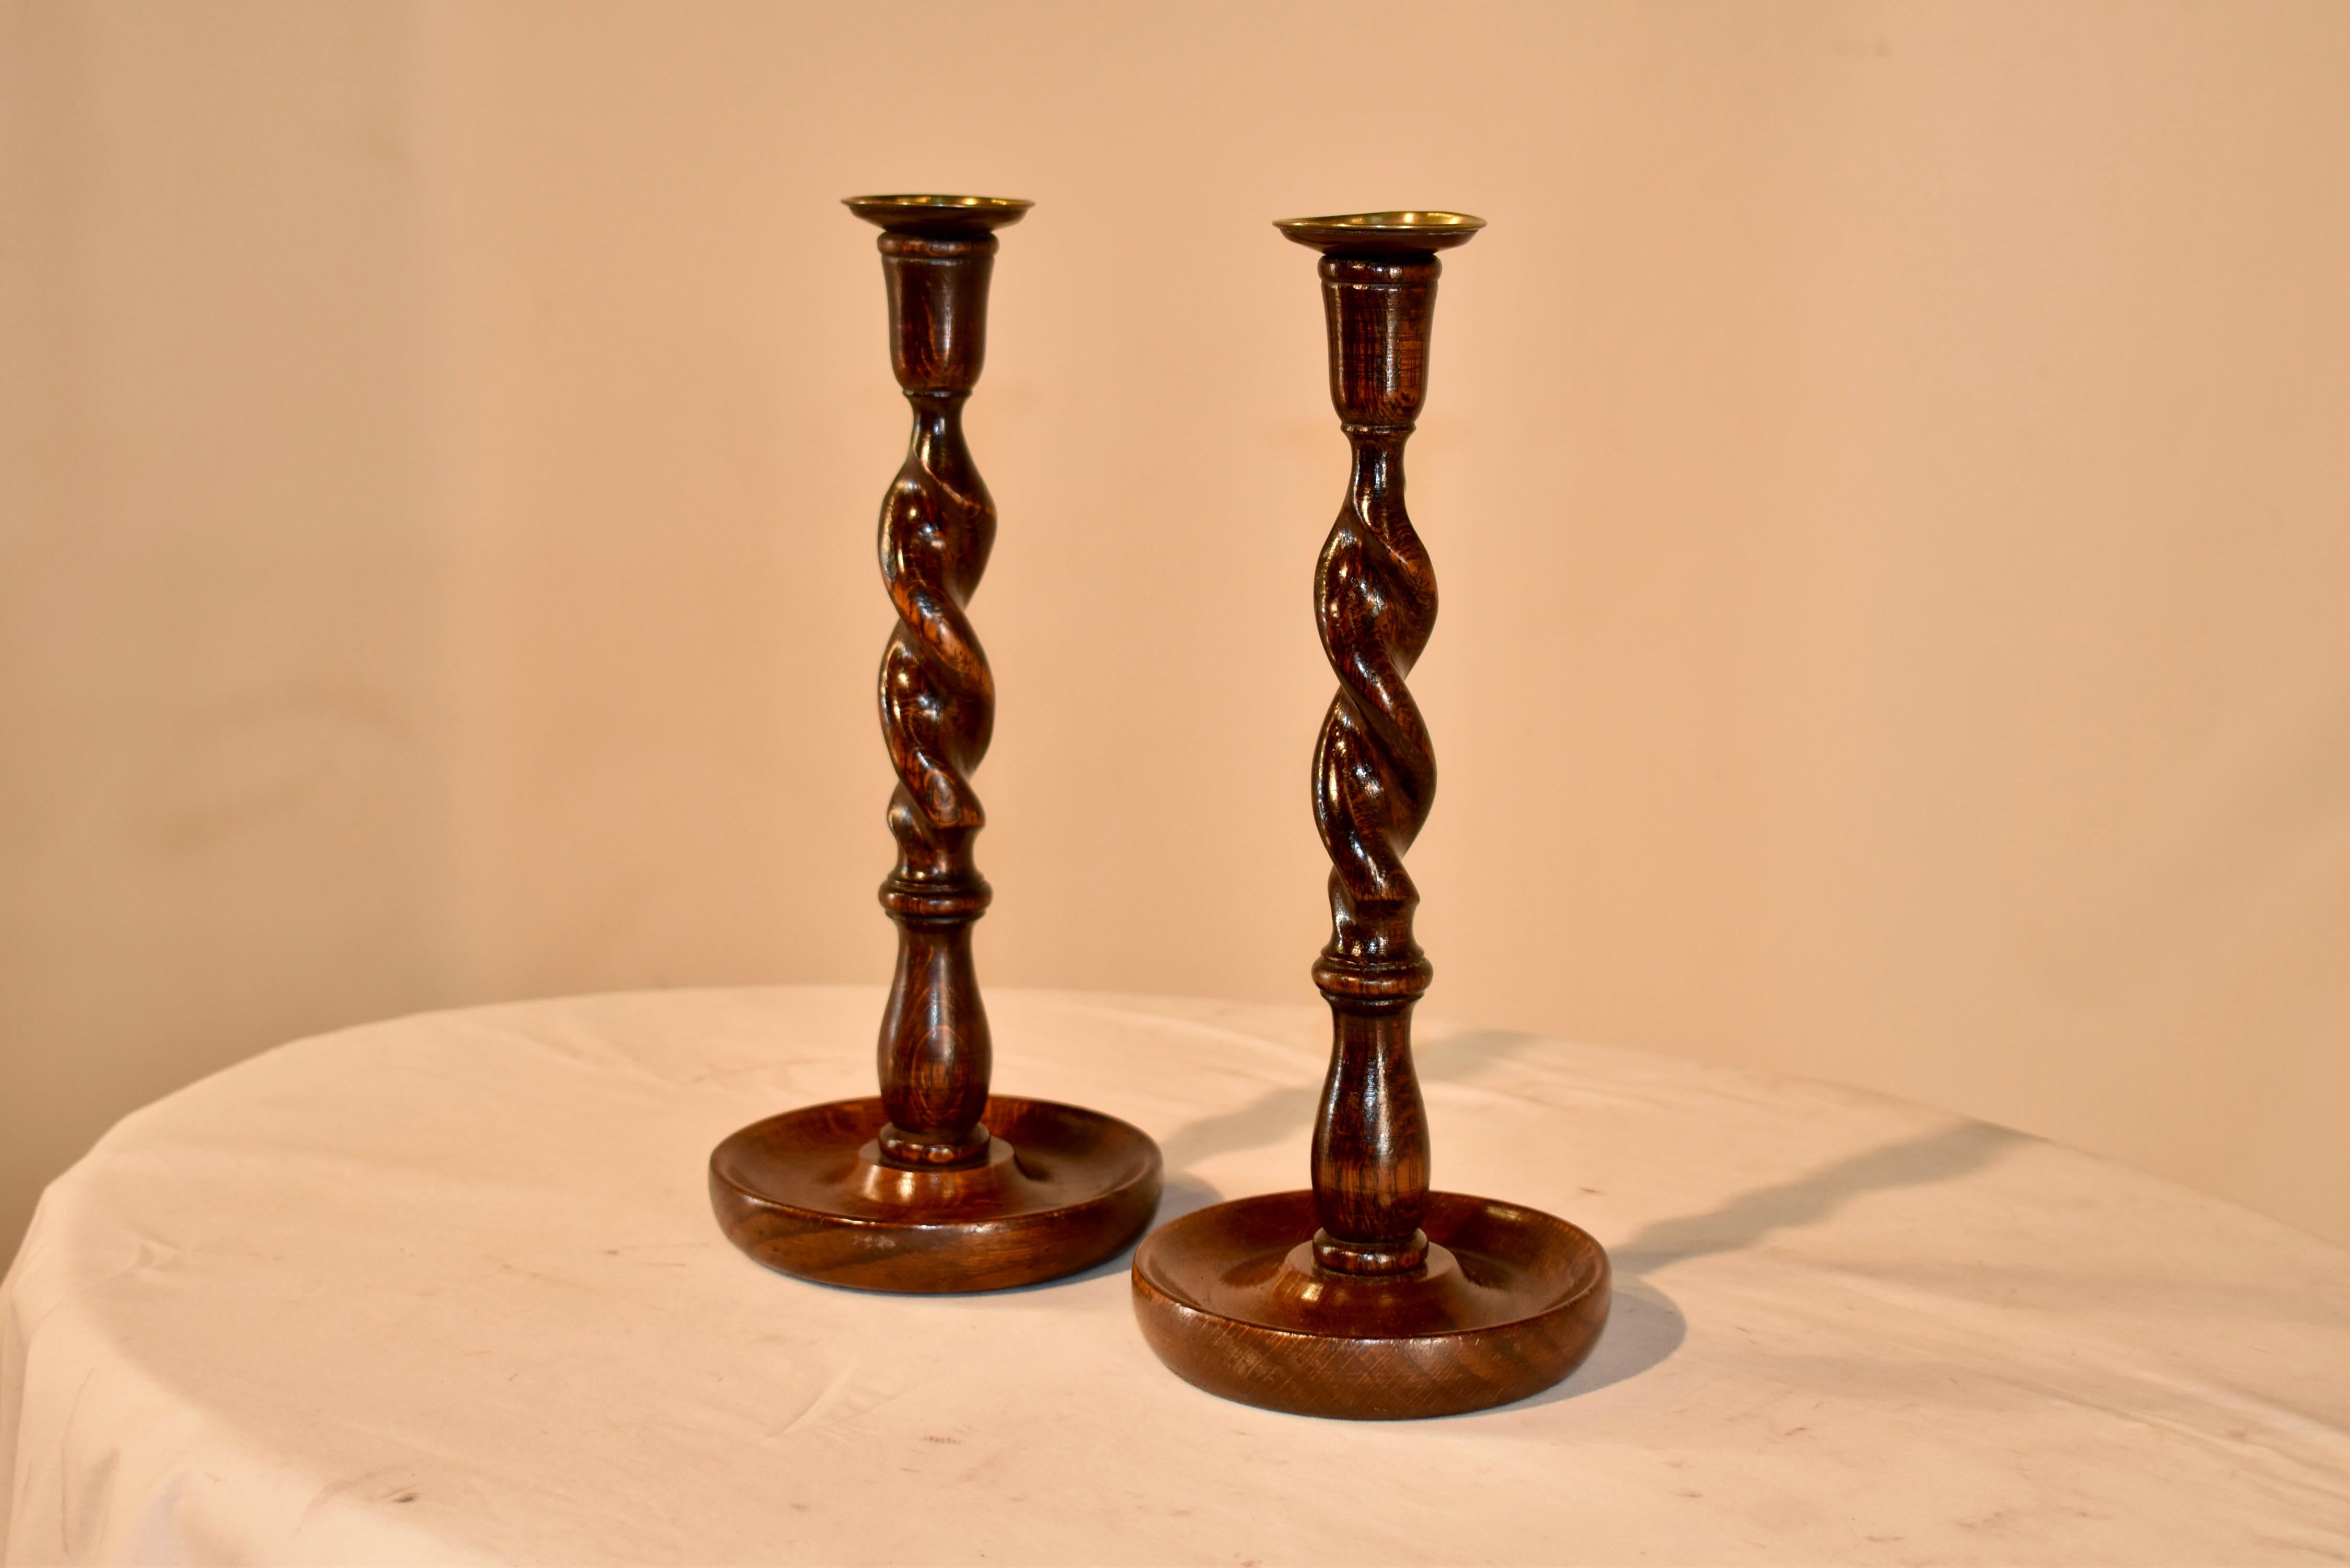 Pair of 19th century oak candlesticks from England with hand turned brass candle cups, supported on hand turned candle cups and barley twist stems, sitting on a hand turned dish shaped base.